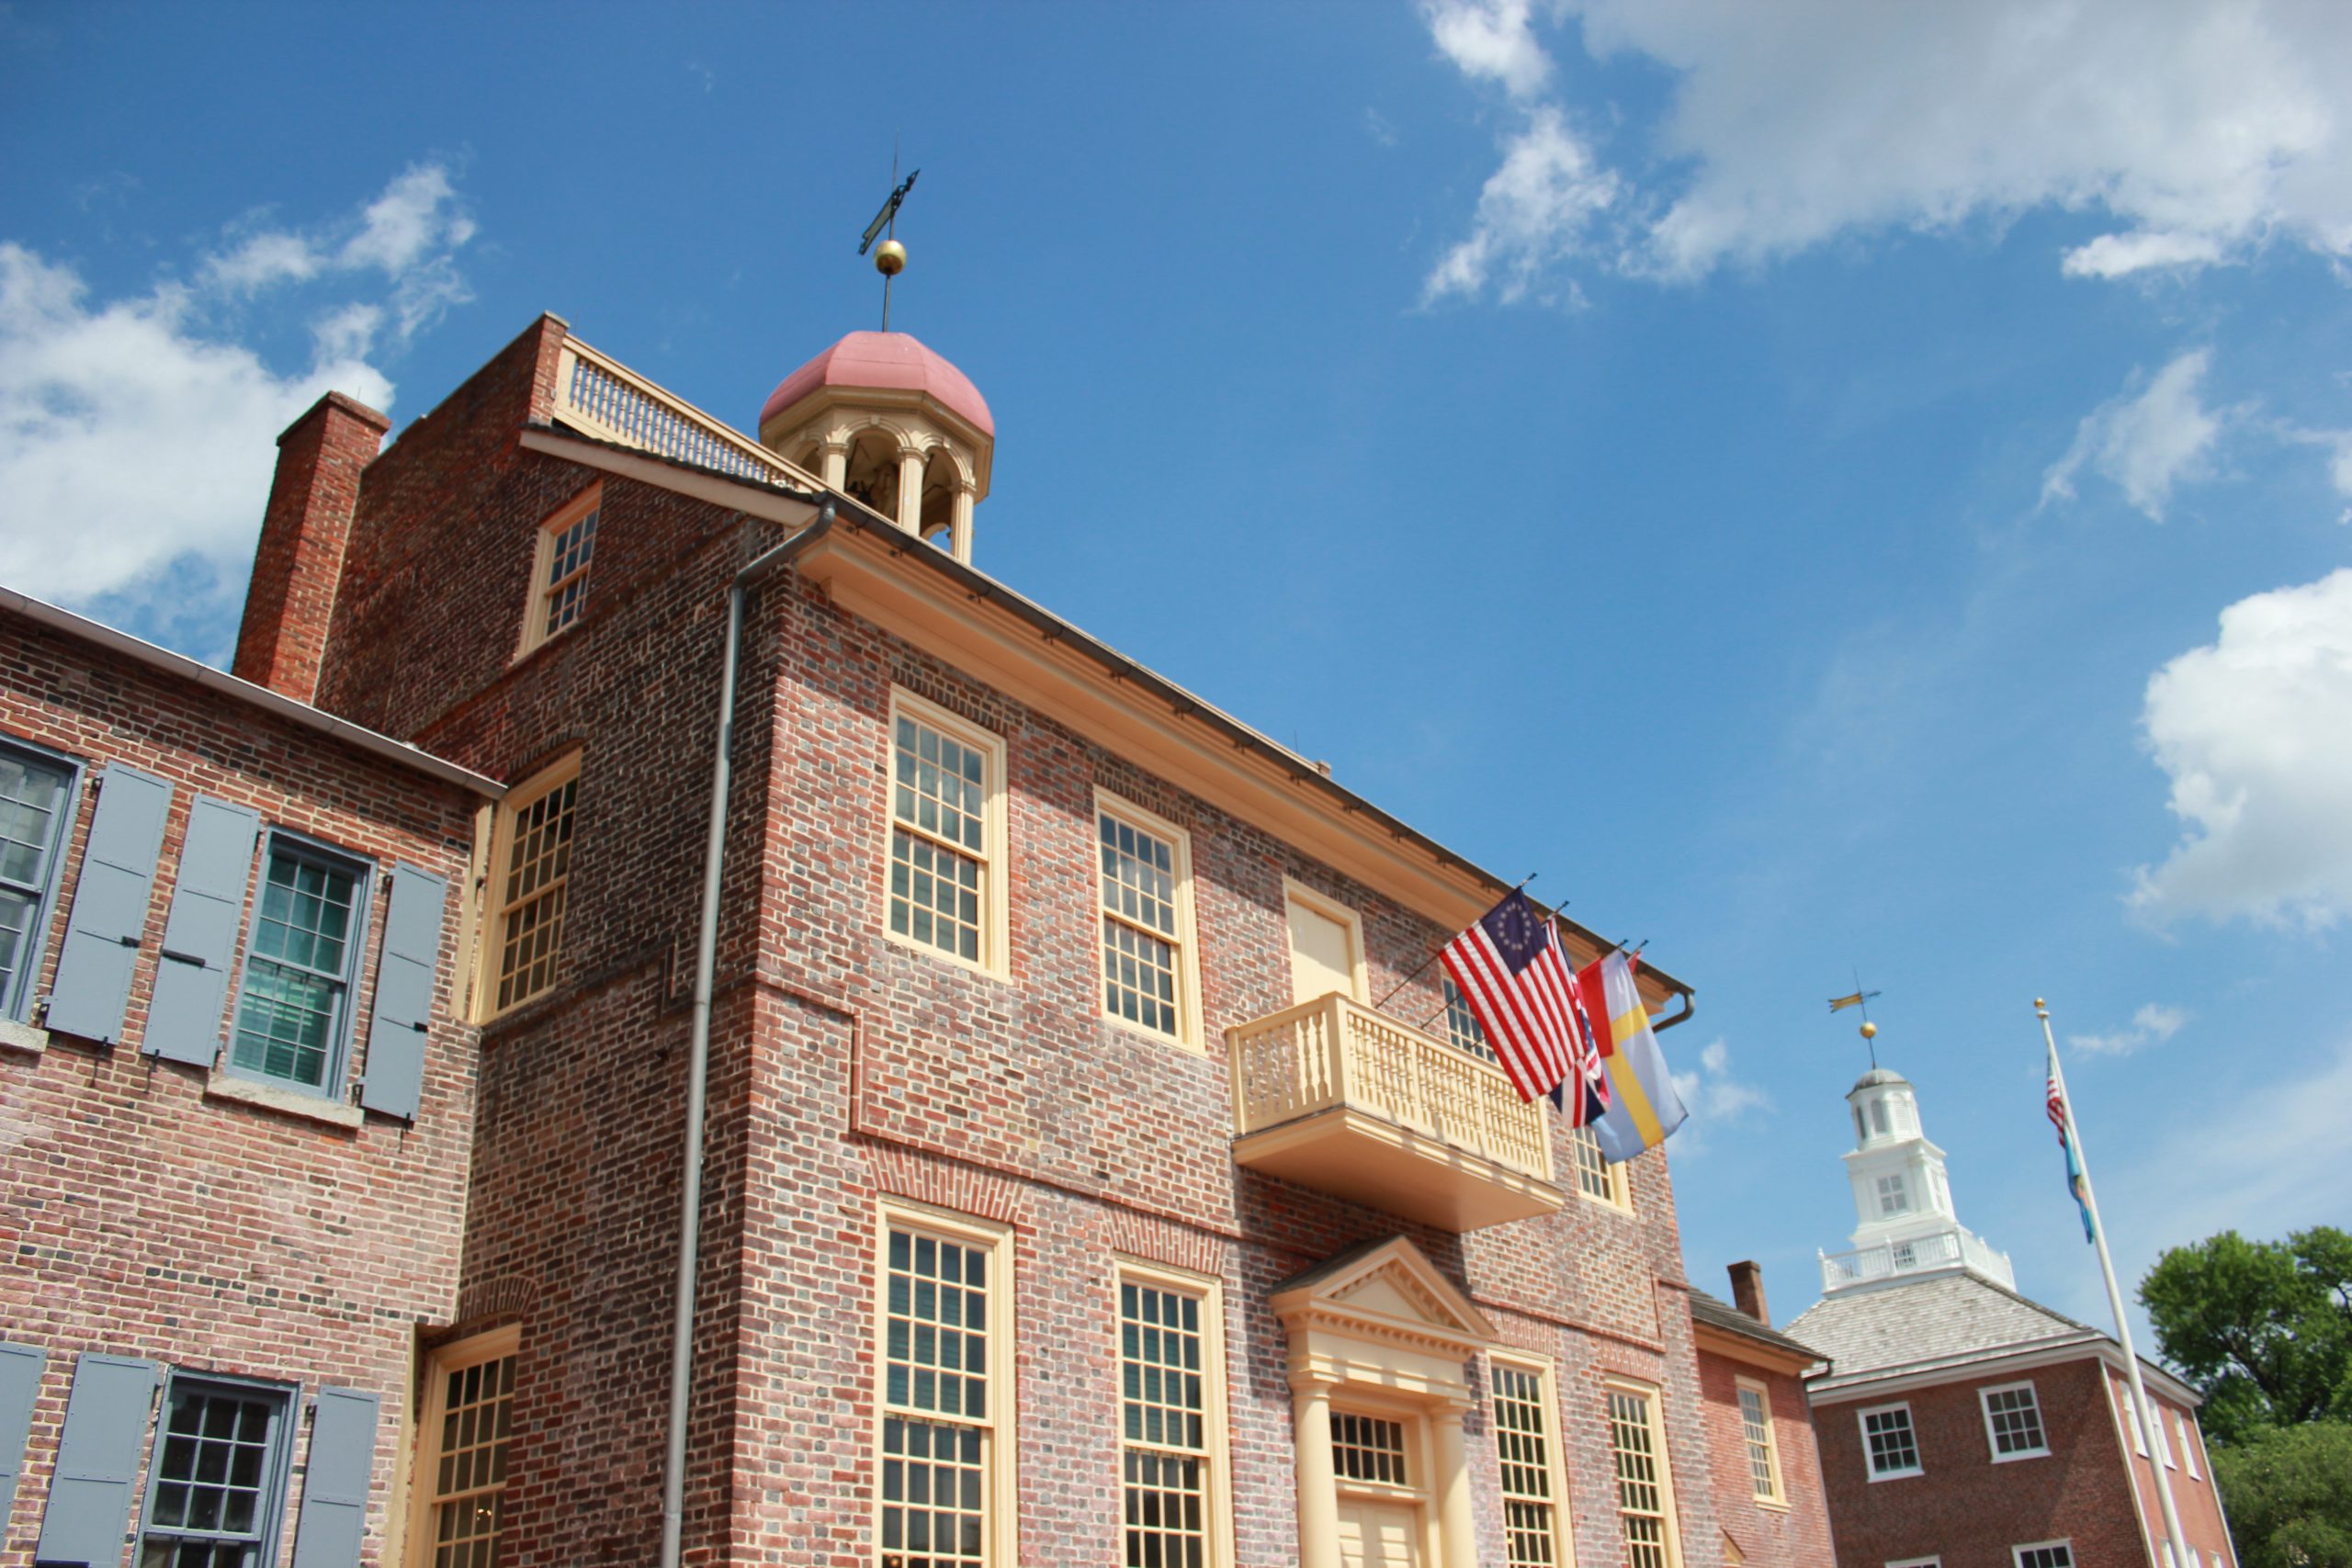 New Castle Court House Museum - a colonial style court house built of red brick with a large bell tower atop its roof